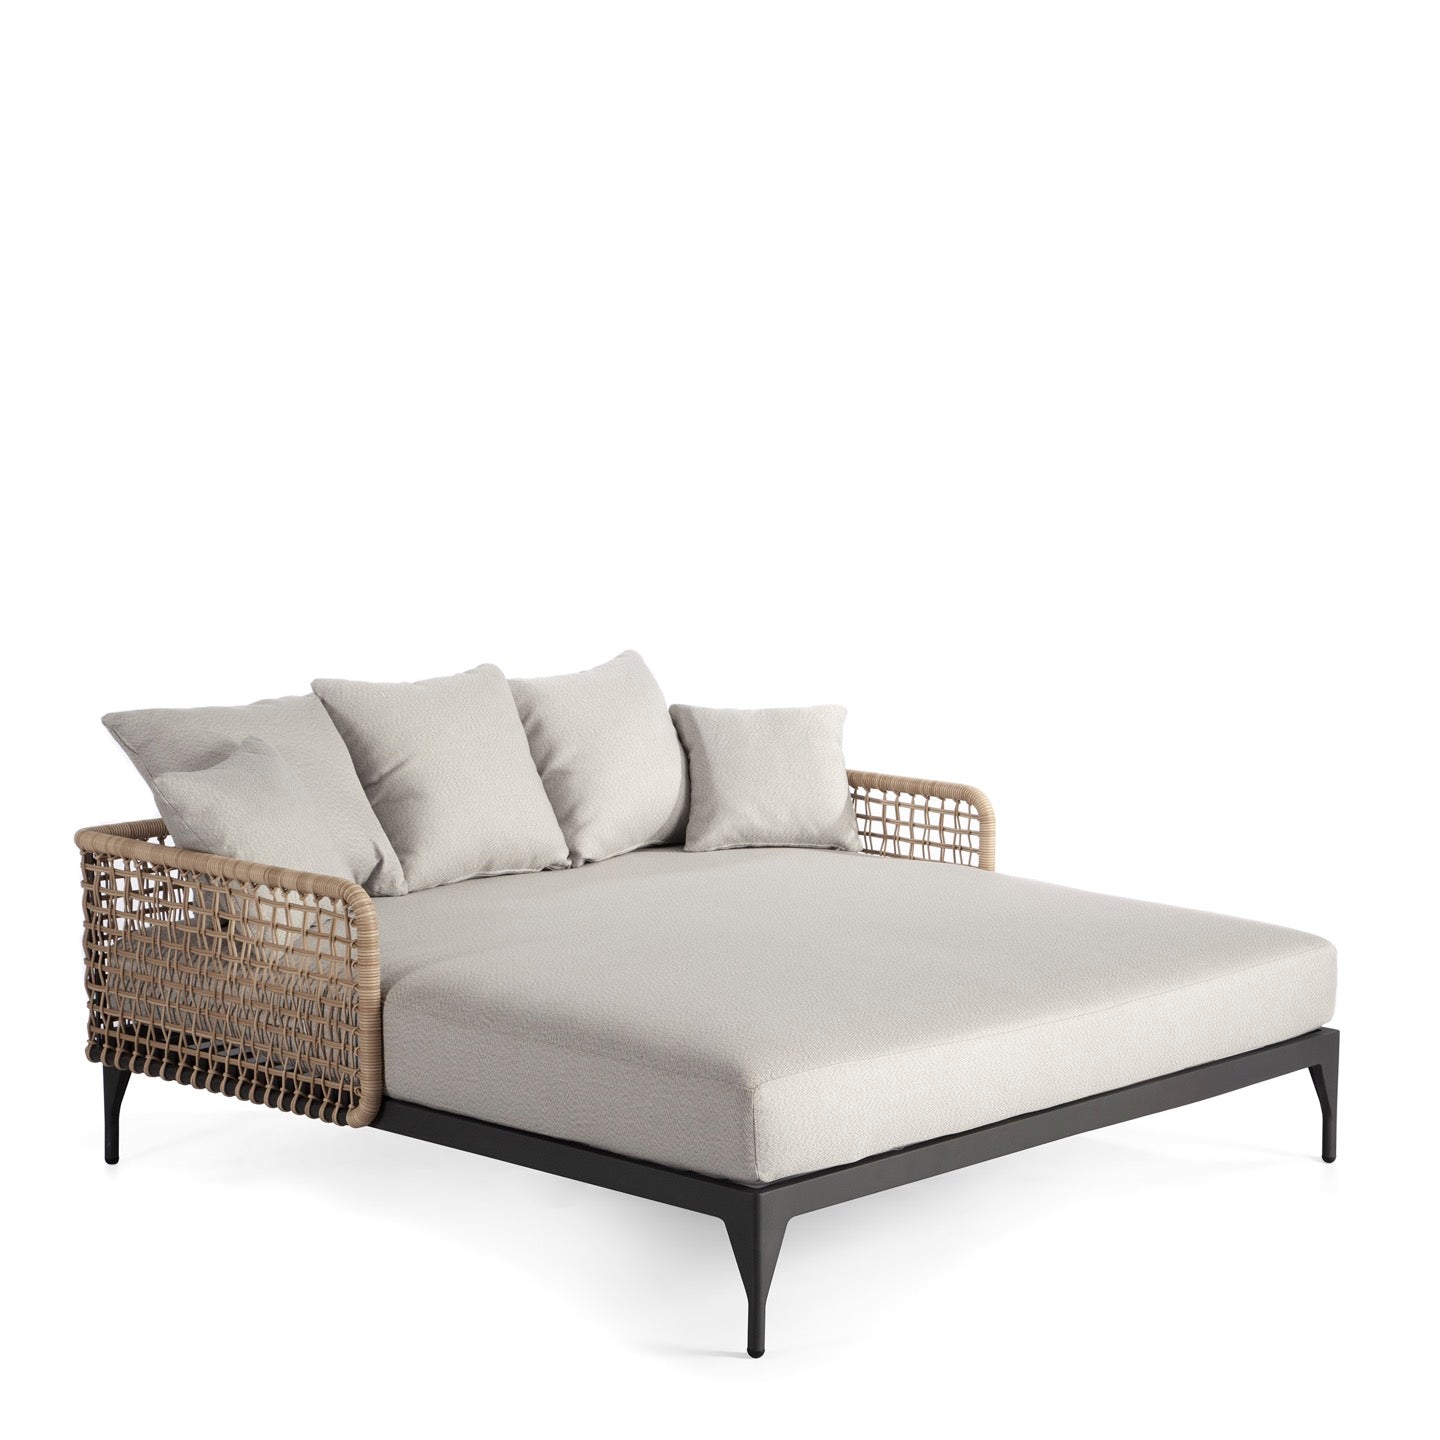 Ribs Daybed